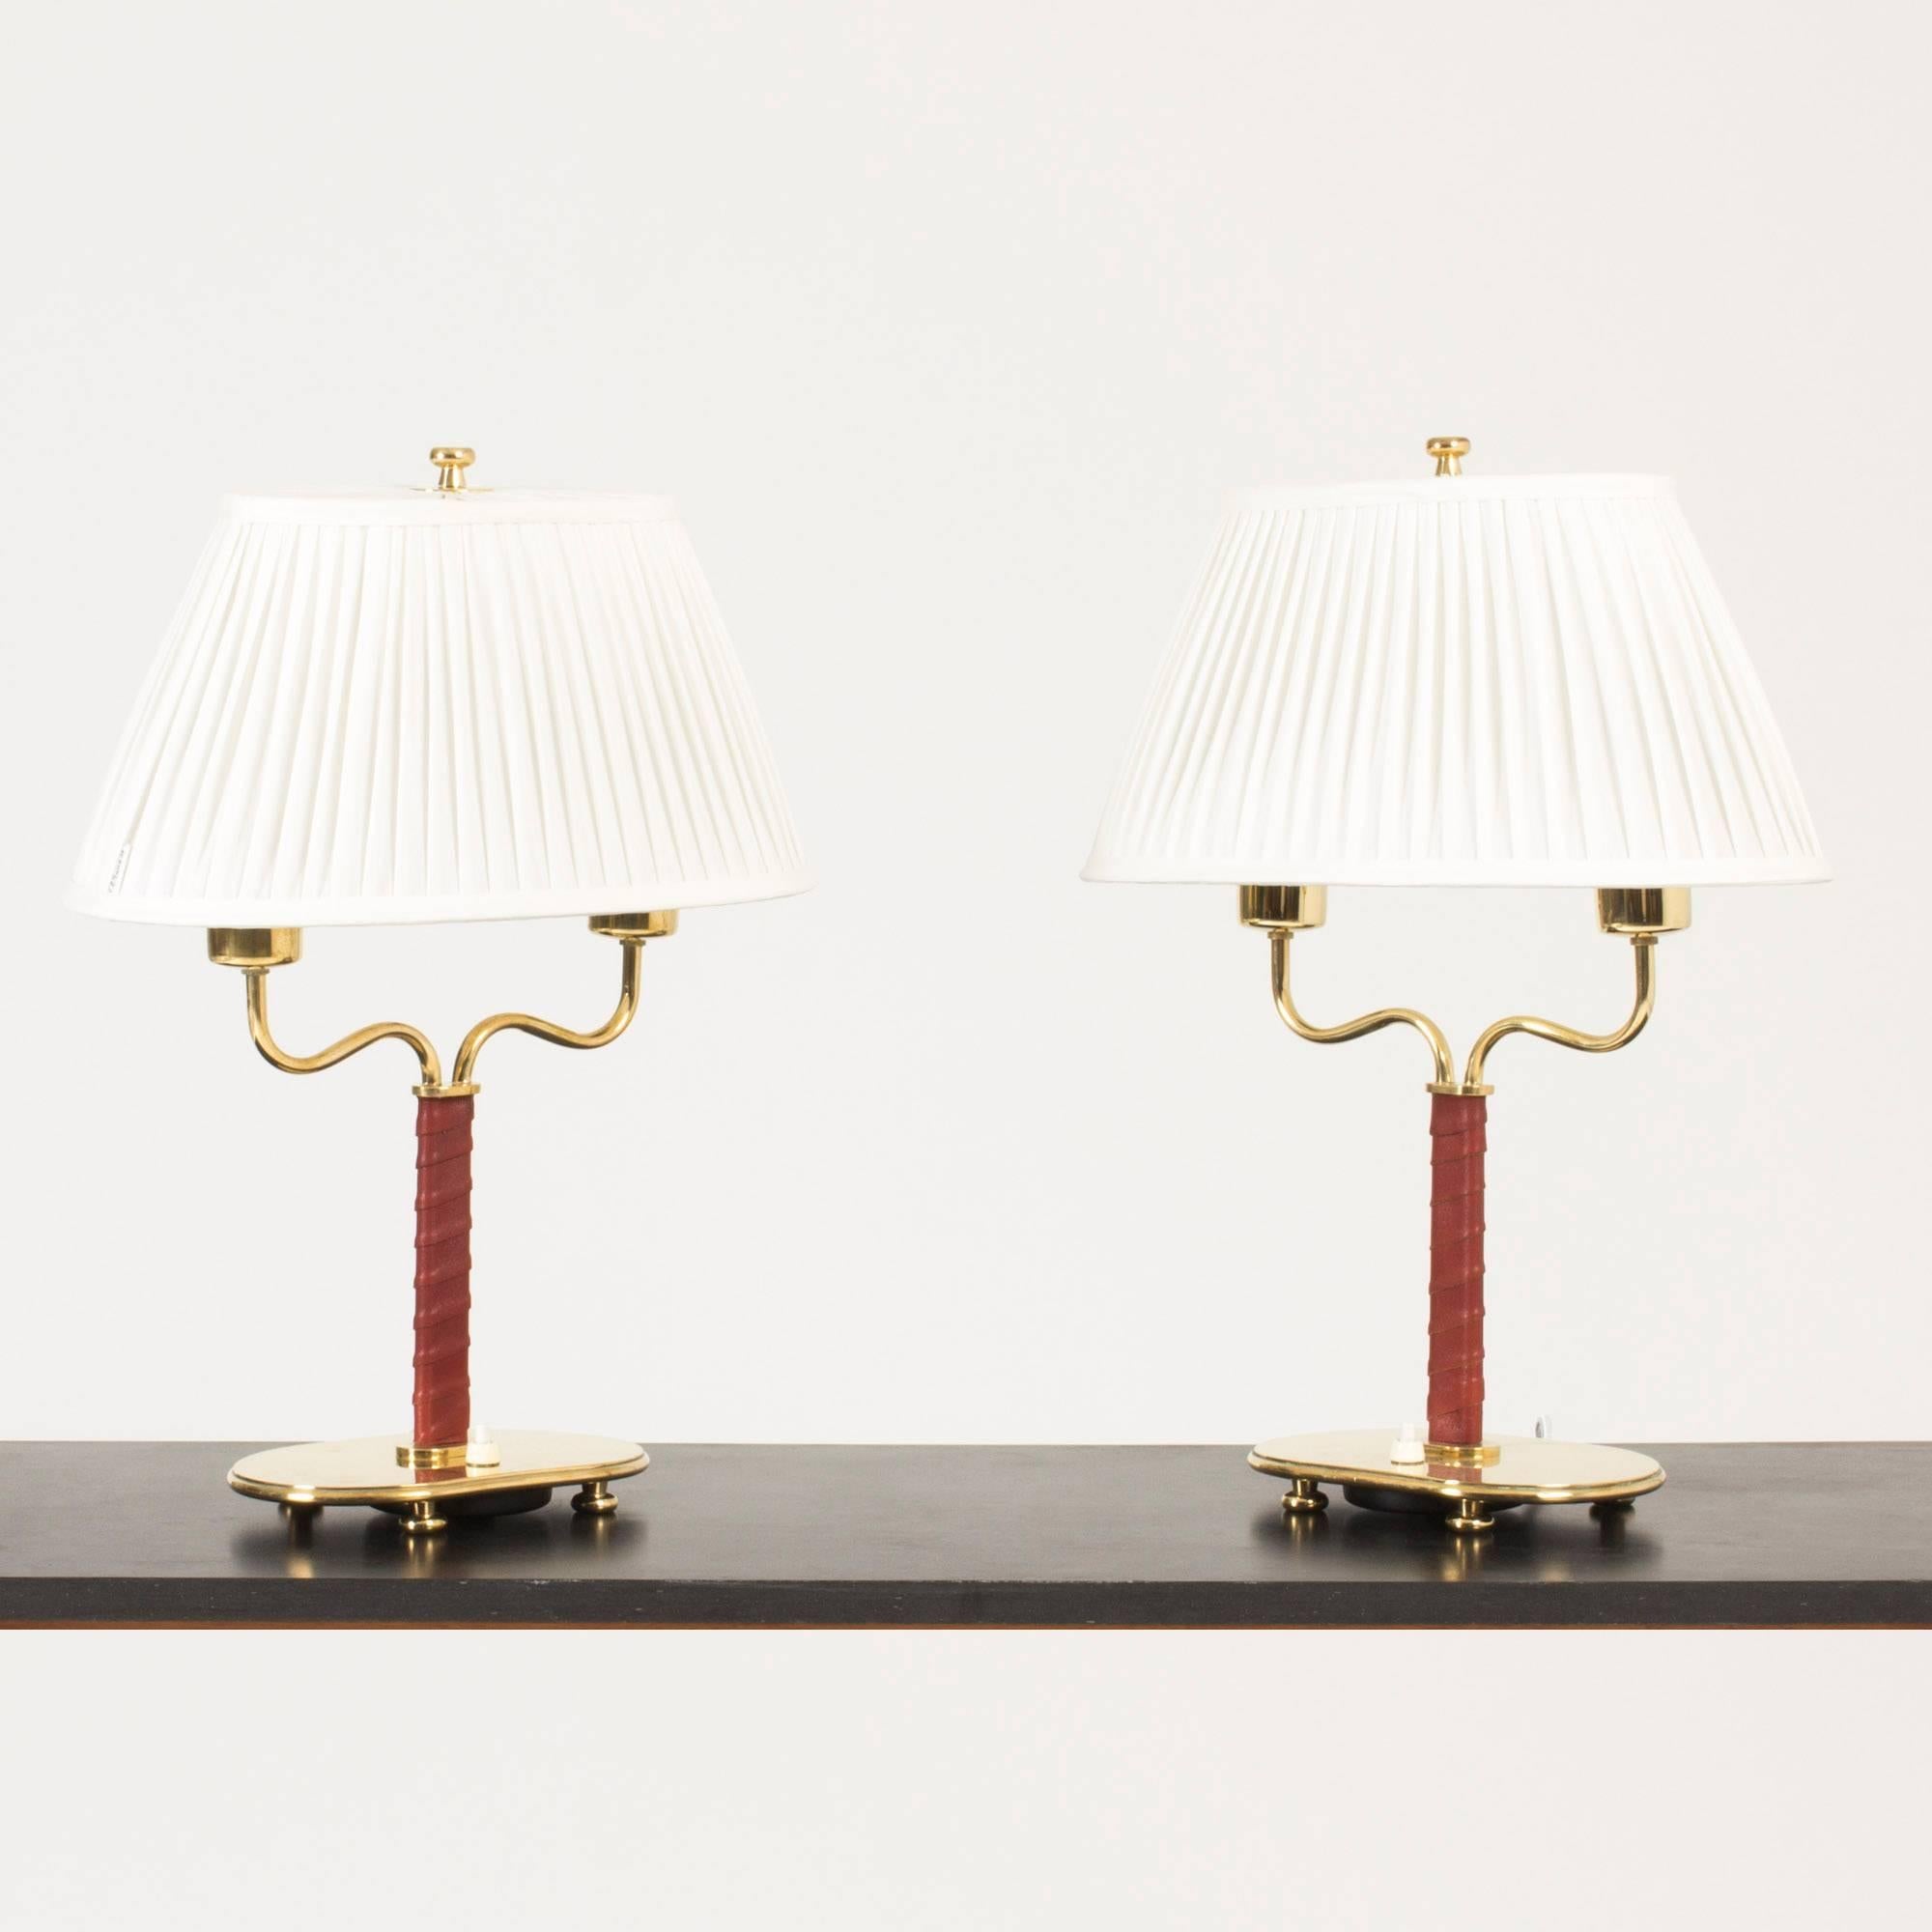 Pair of beautiful, exceptionally elegant table lamps by Josef Frank. Made from brass with little feet under the bases, handles wreathed with oxblood leather. Oval shaped white shades with brass knobs at the top.